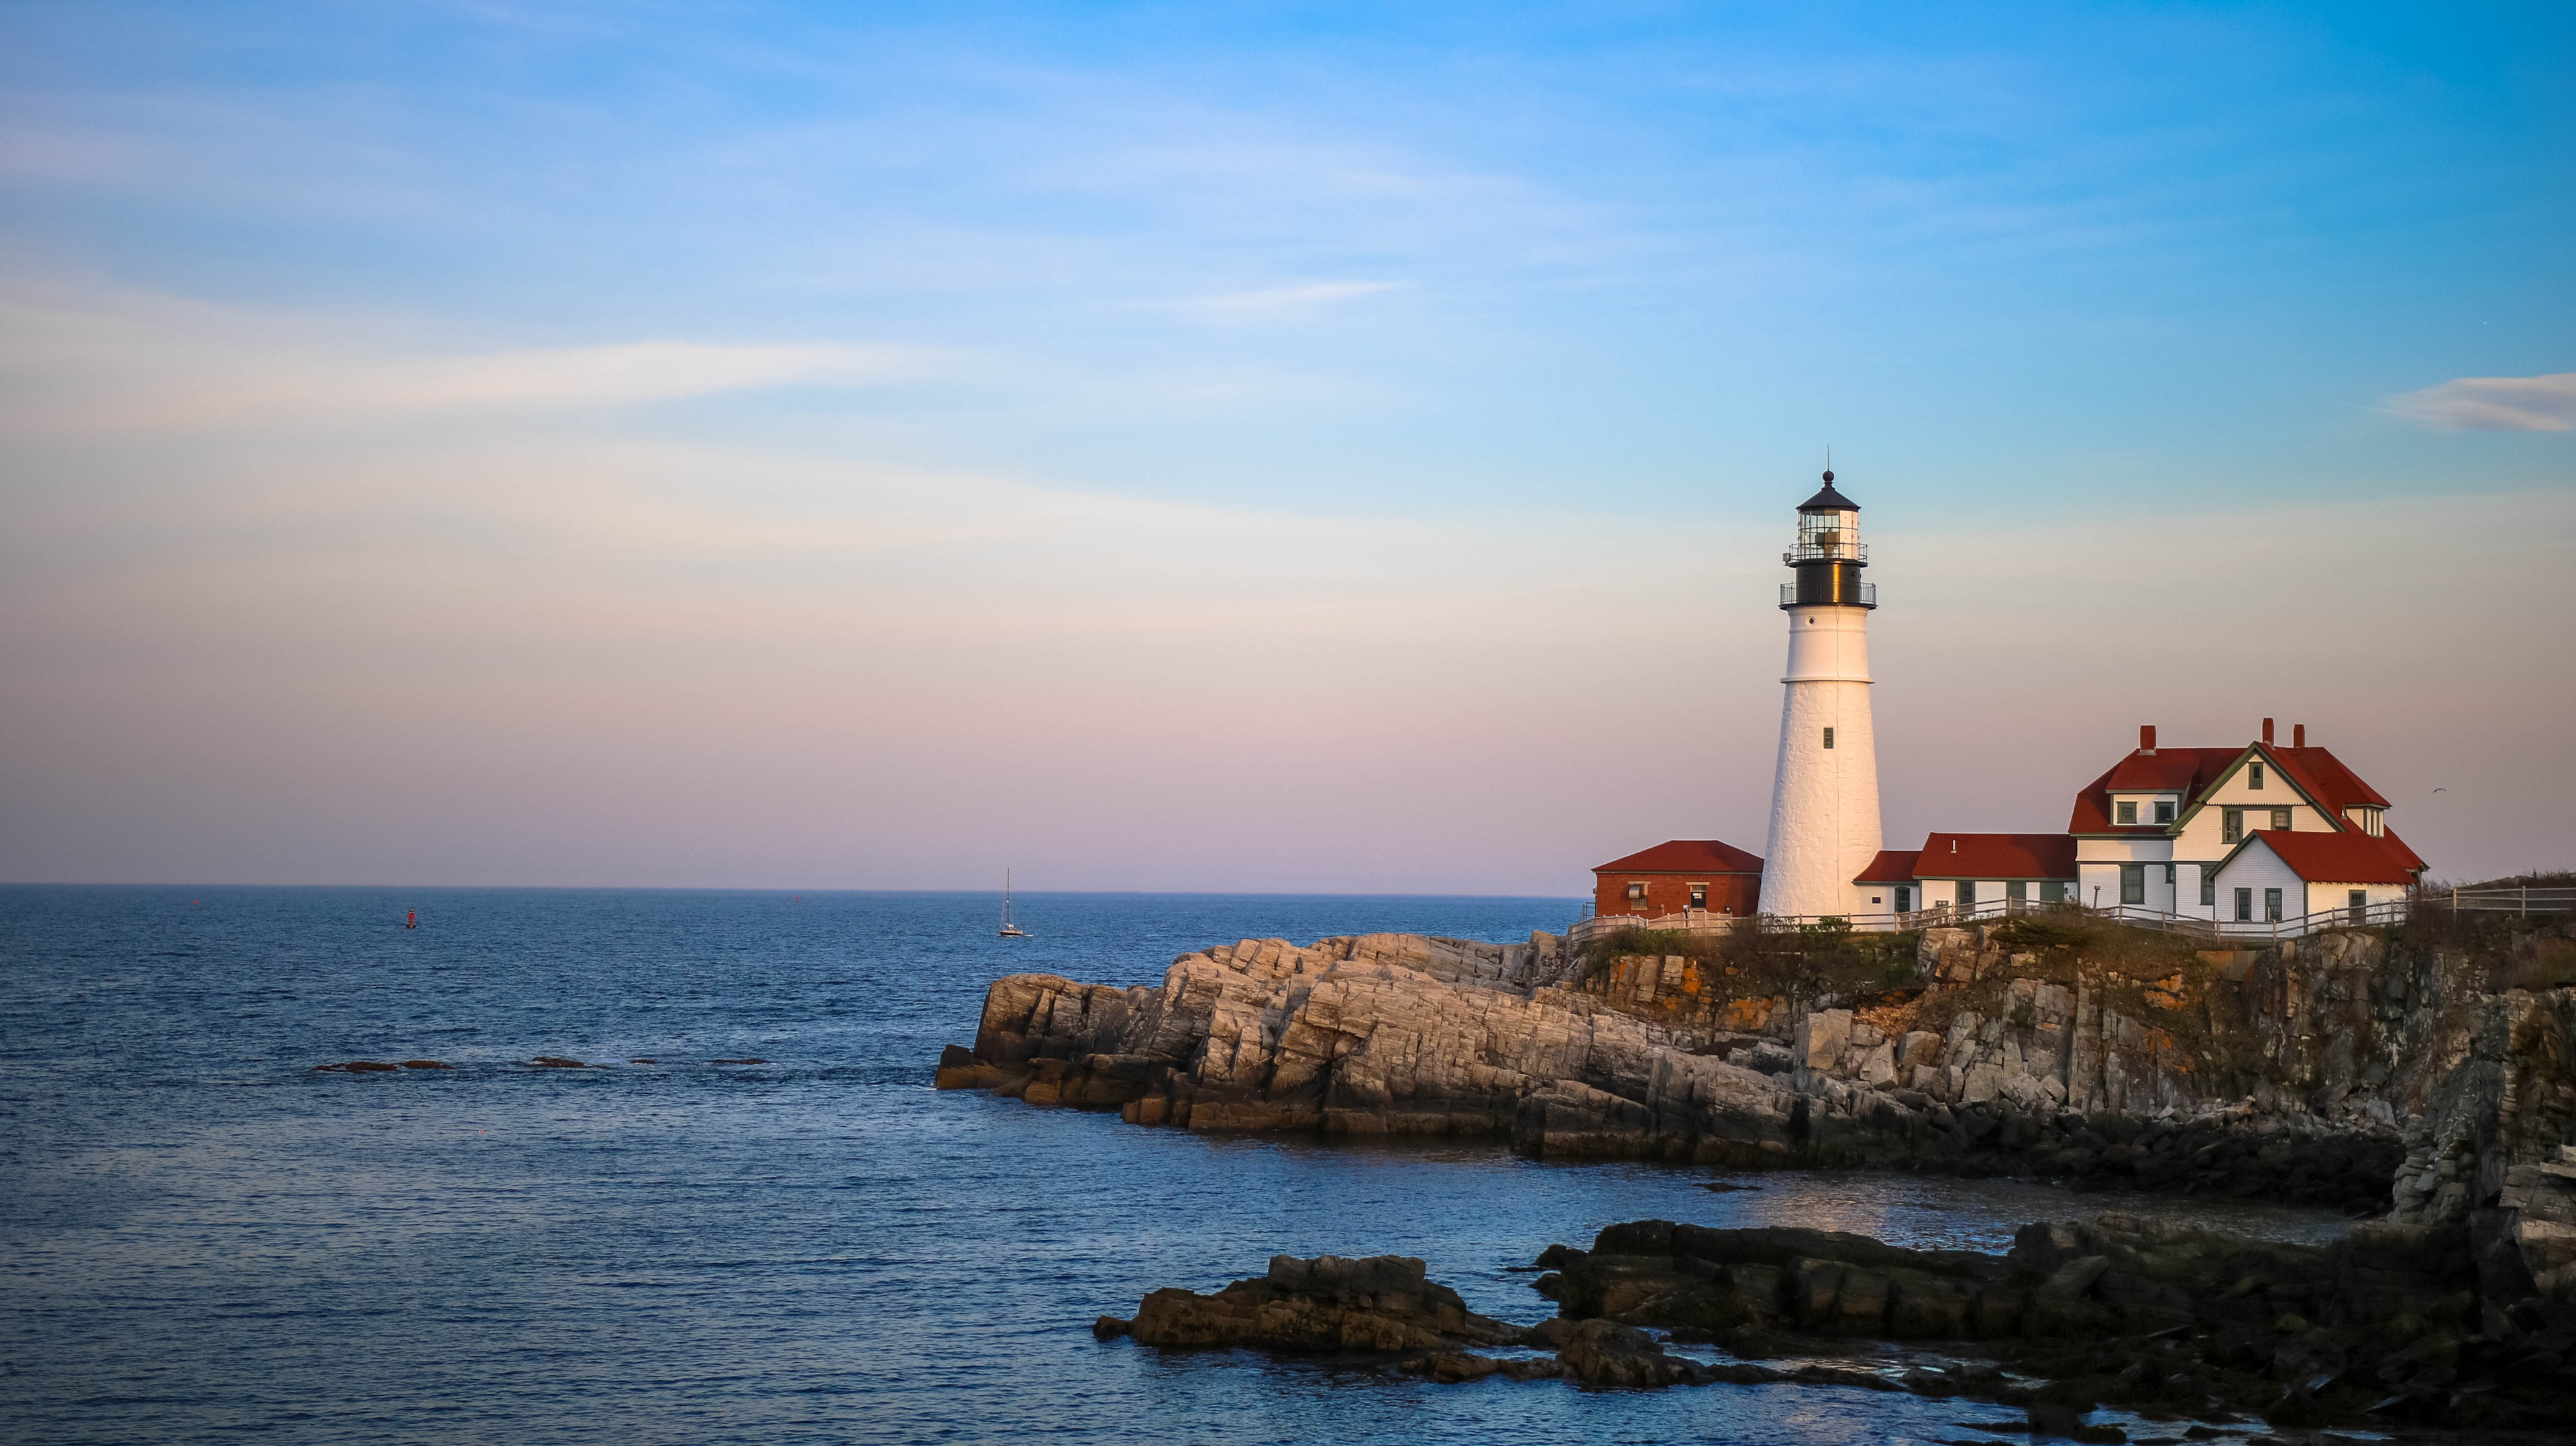 Things to do in Maine - Lighthouse viewing